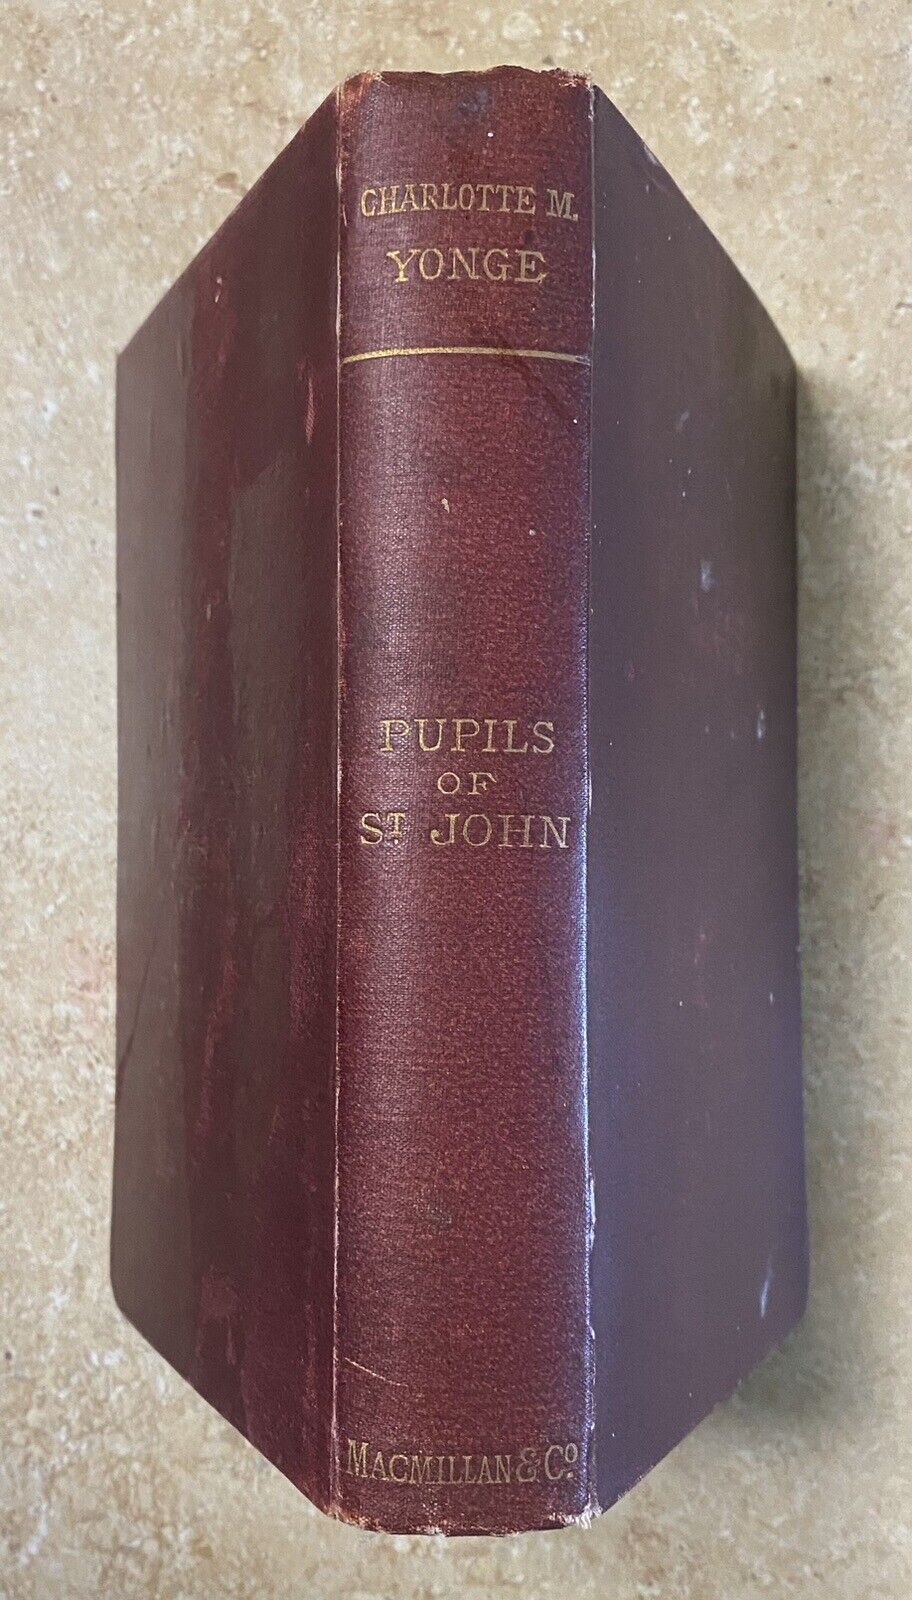 1885 The Pupils Of St. John The Divine by Charlotte M. Yonge...1st Edition